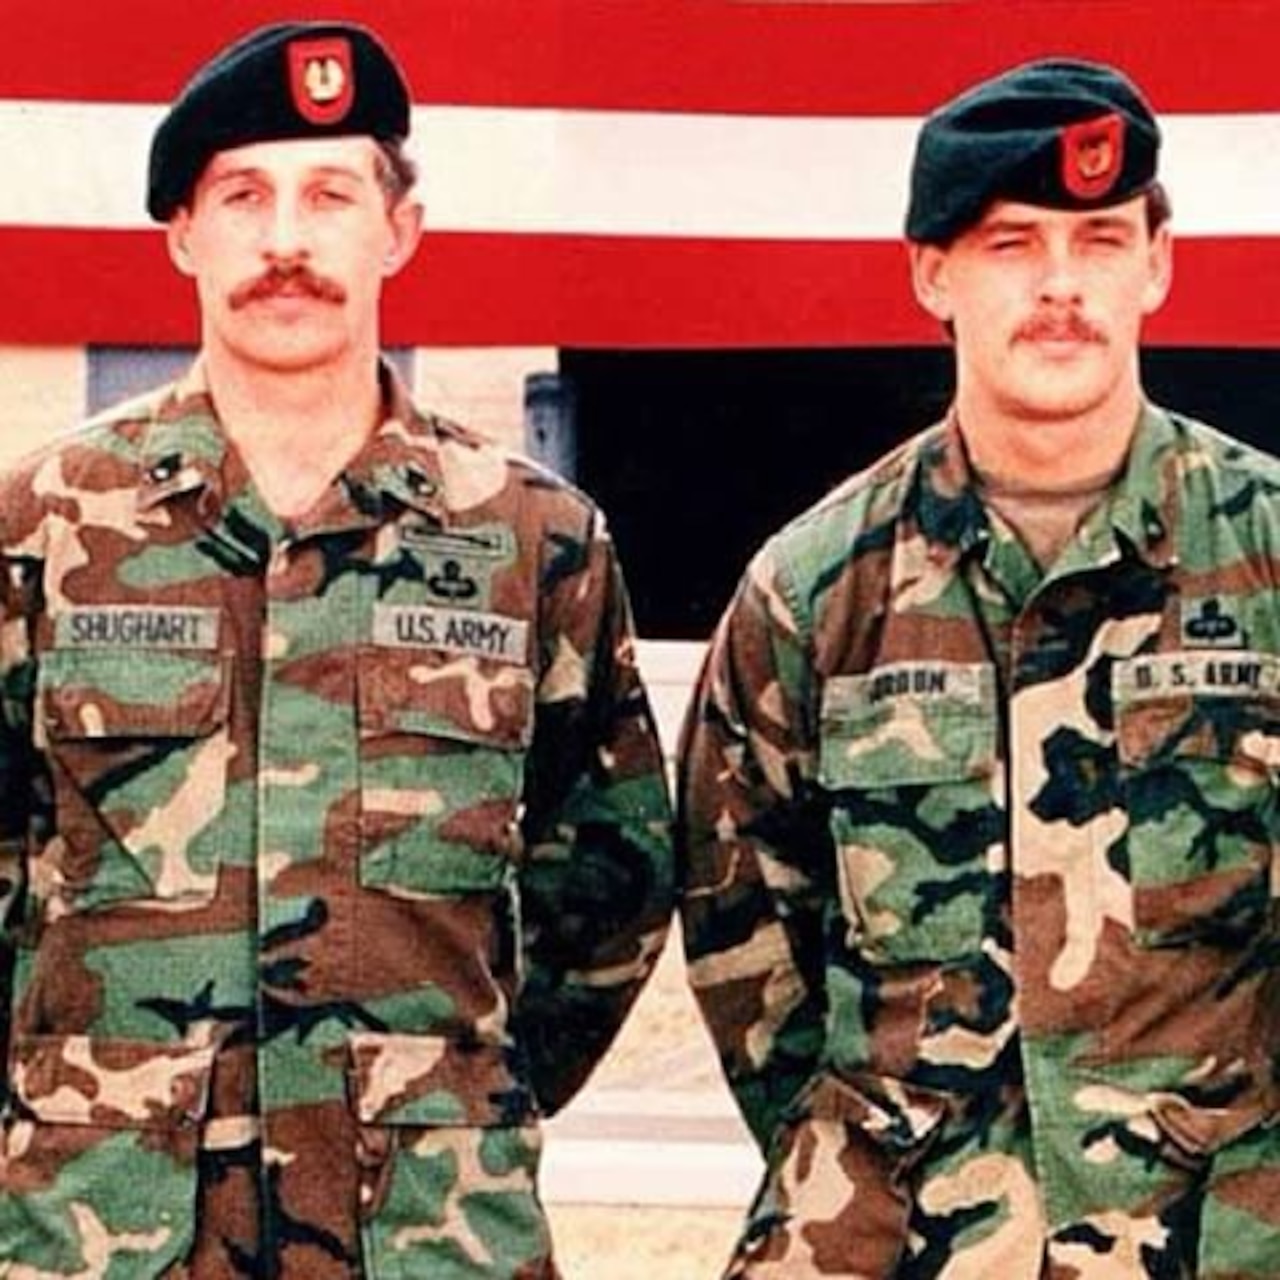 Two Delta Force soldiers wearing camouflage and black hats with red logos stand with their hands behind their backs in front of an American flag.